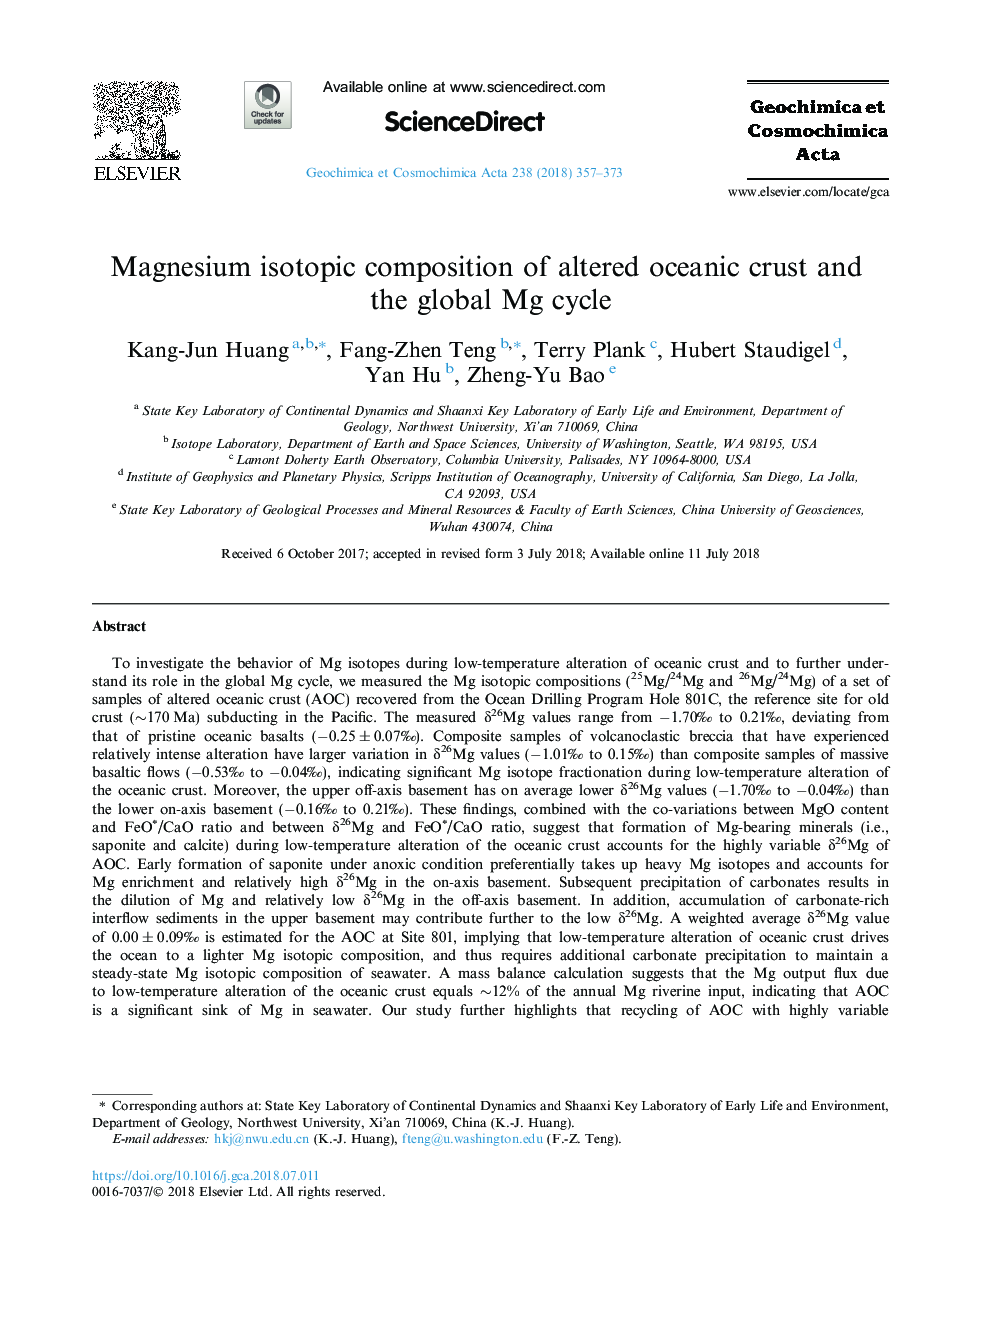 Magnesium isotopic composition of altered oceanic crust and the global Mg cycle